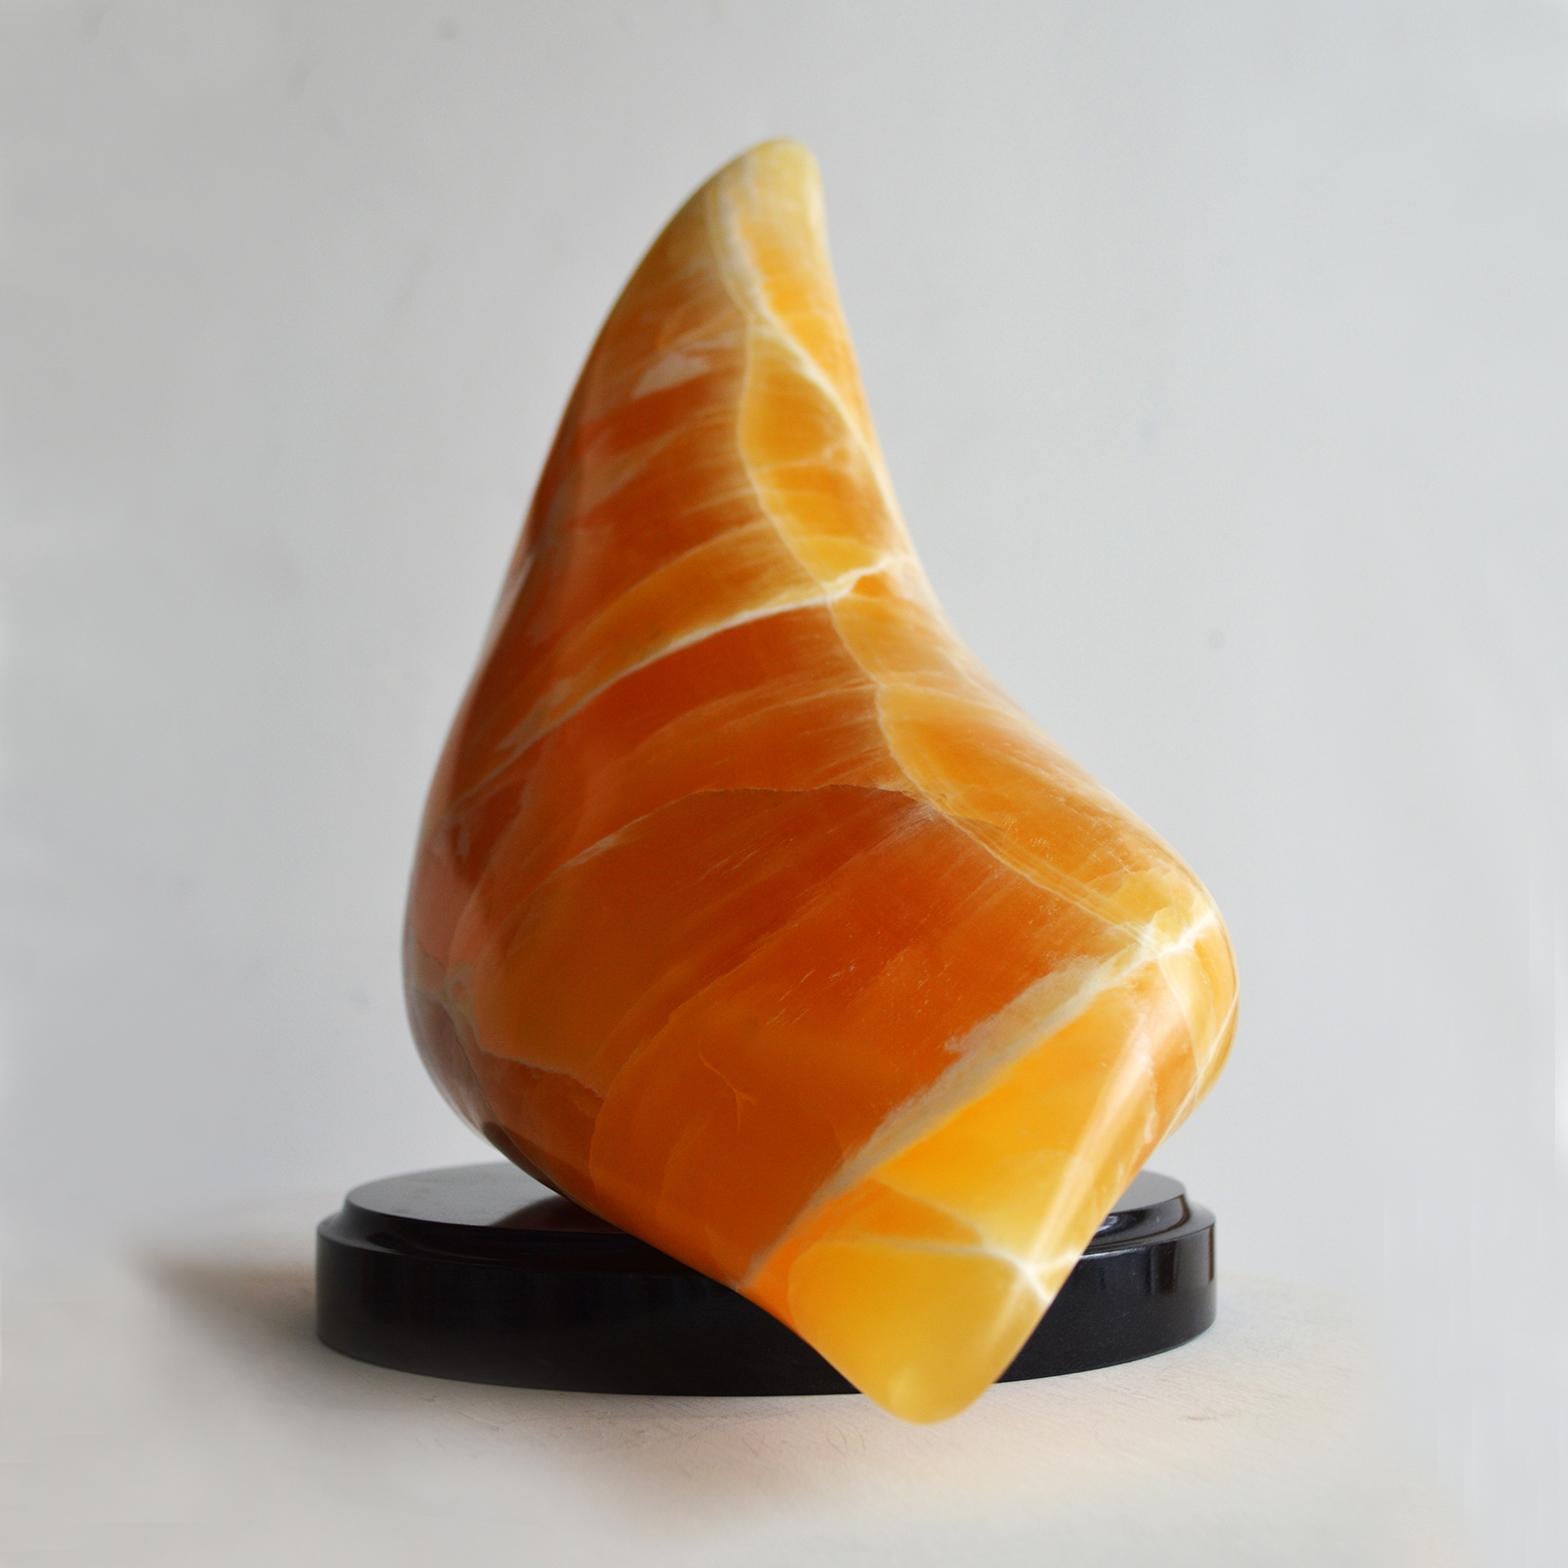 Morning Sun, abstract orange sculpture, calcite on base - Sculpture by Lilian R Engel